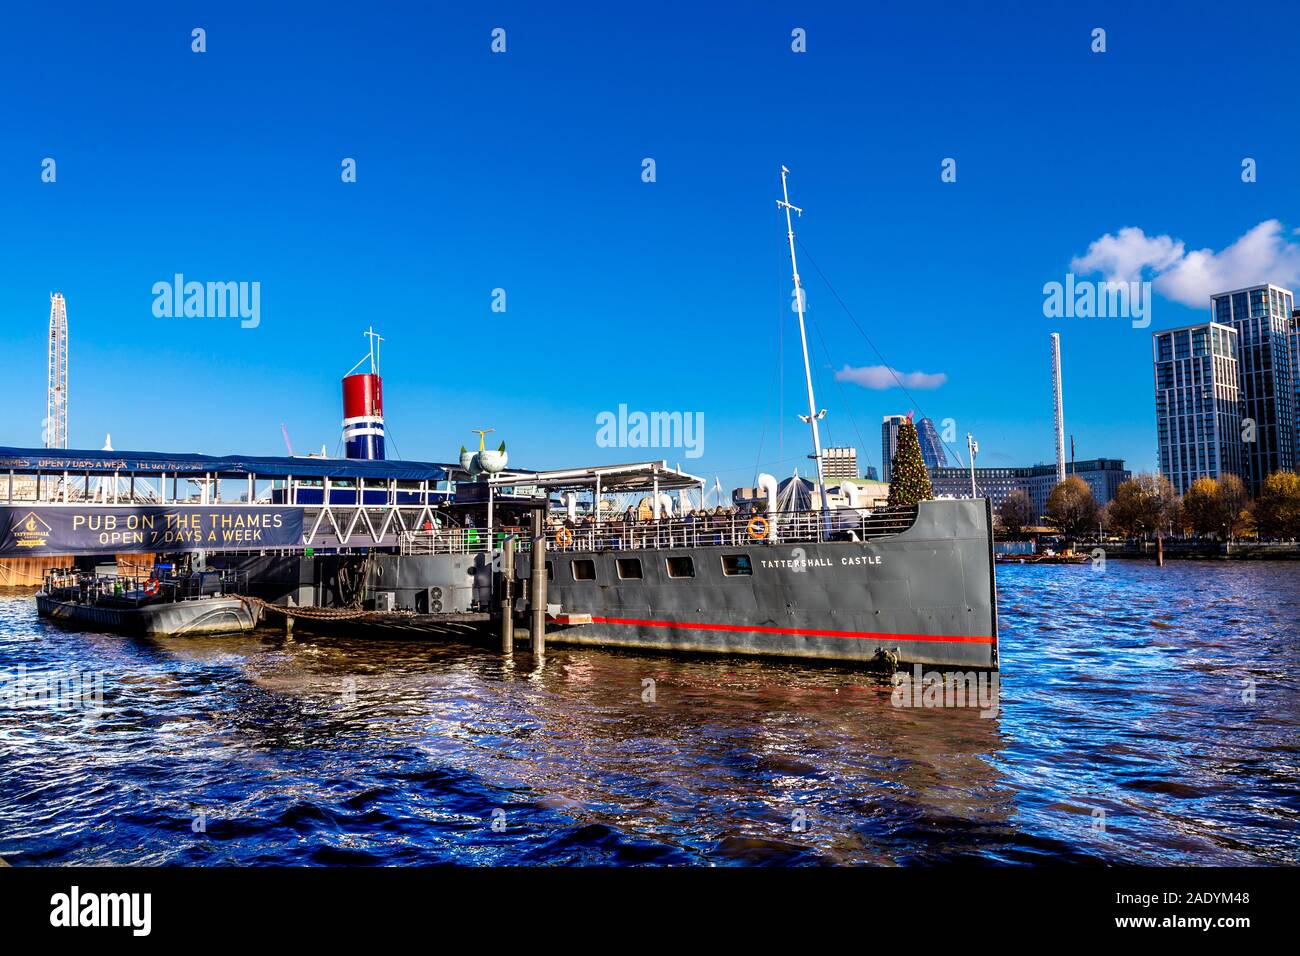 Tattershall Castle - floating pub on a boat on the Thames river, London, UK Stock Photo